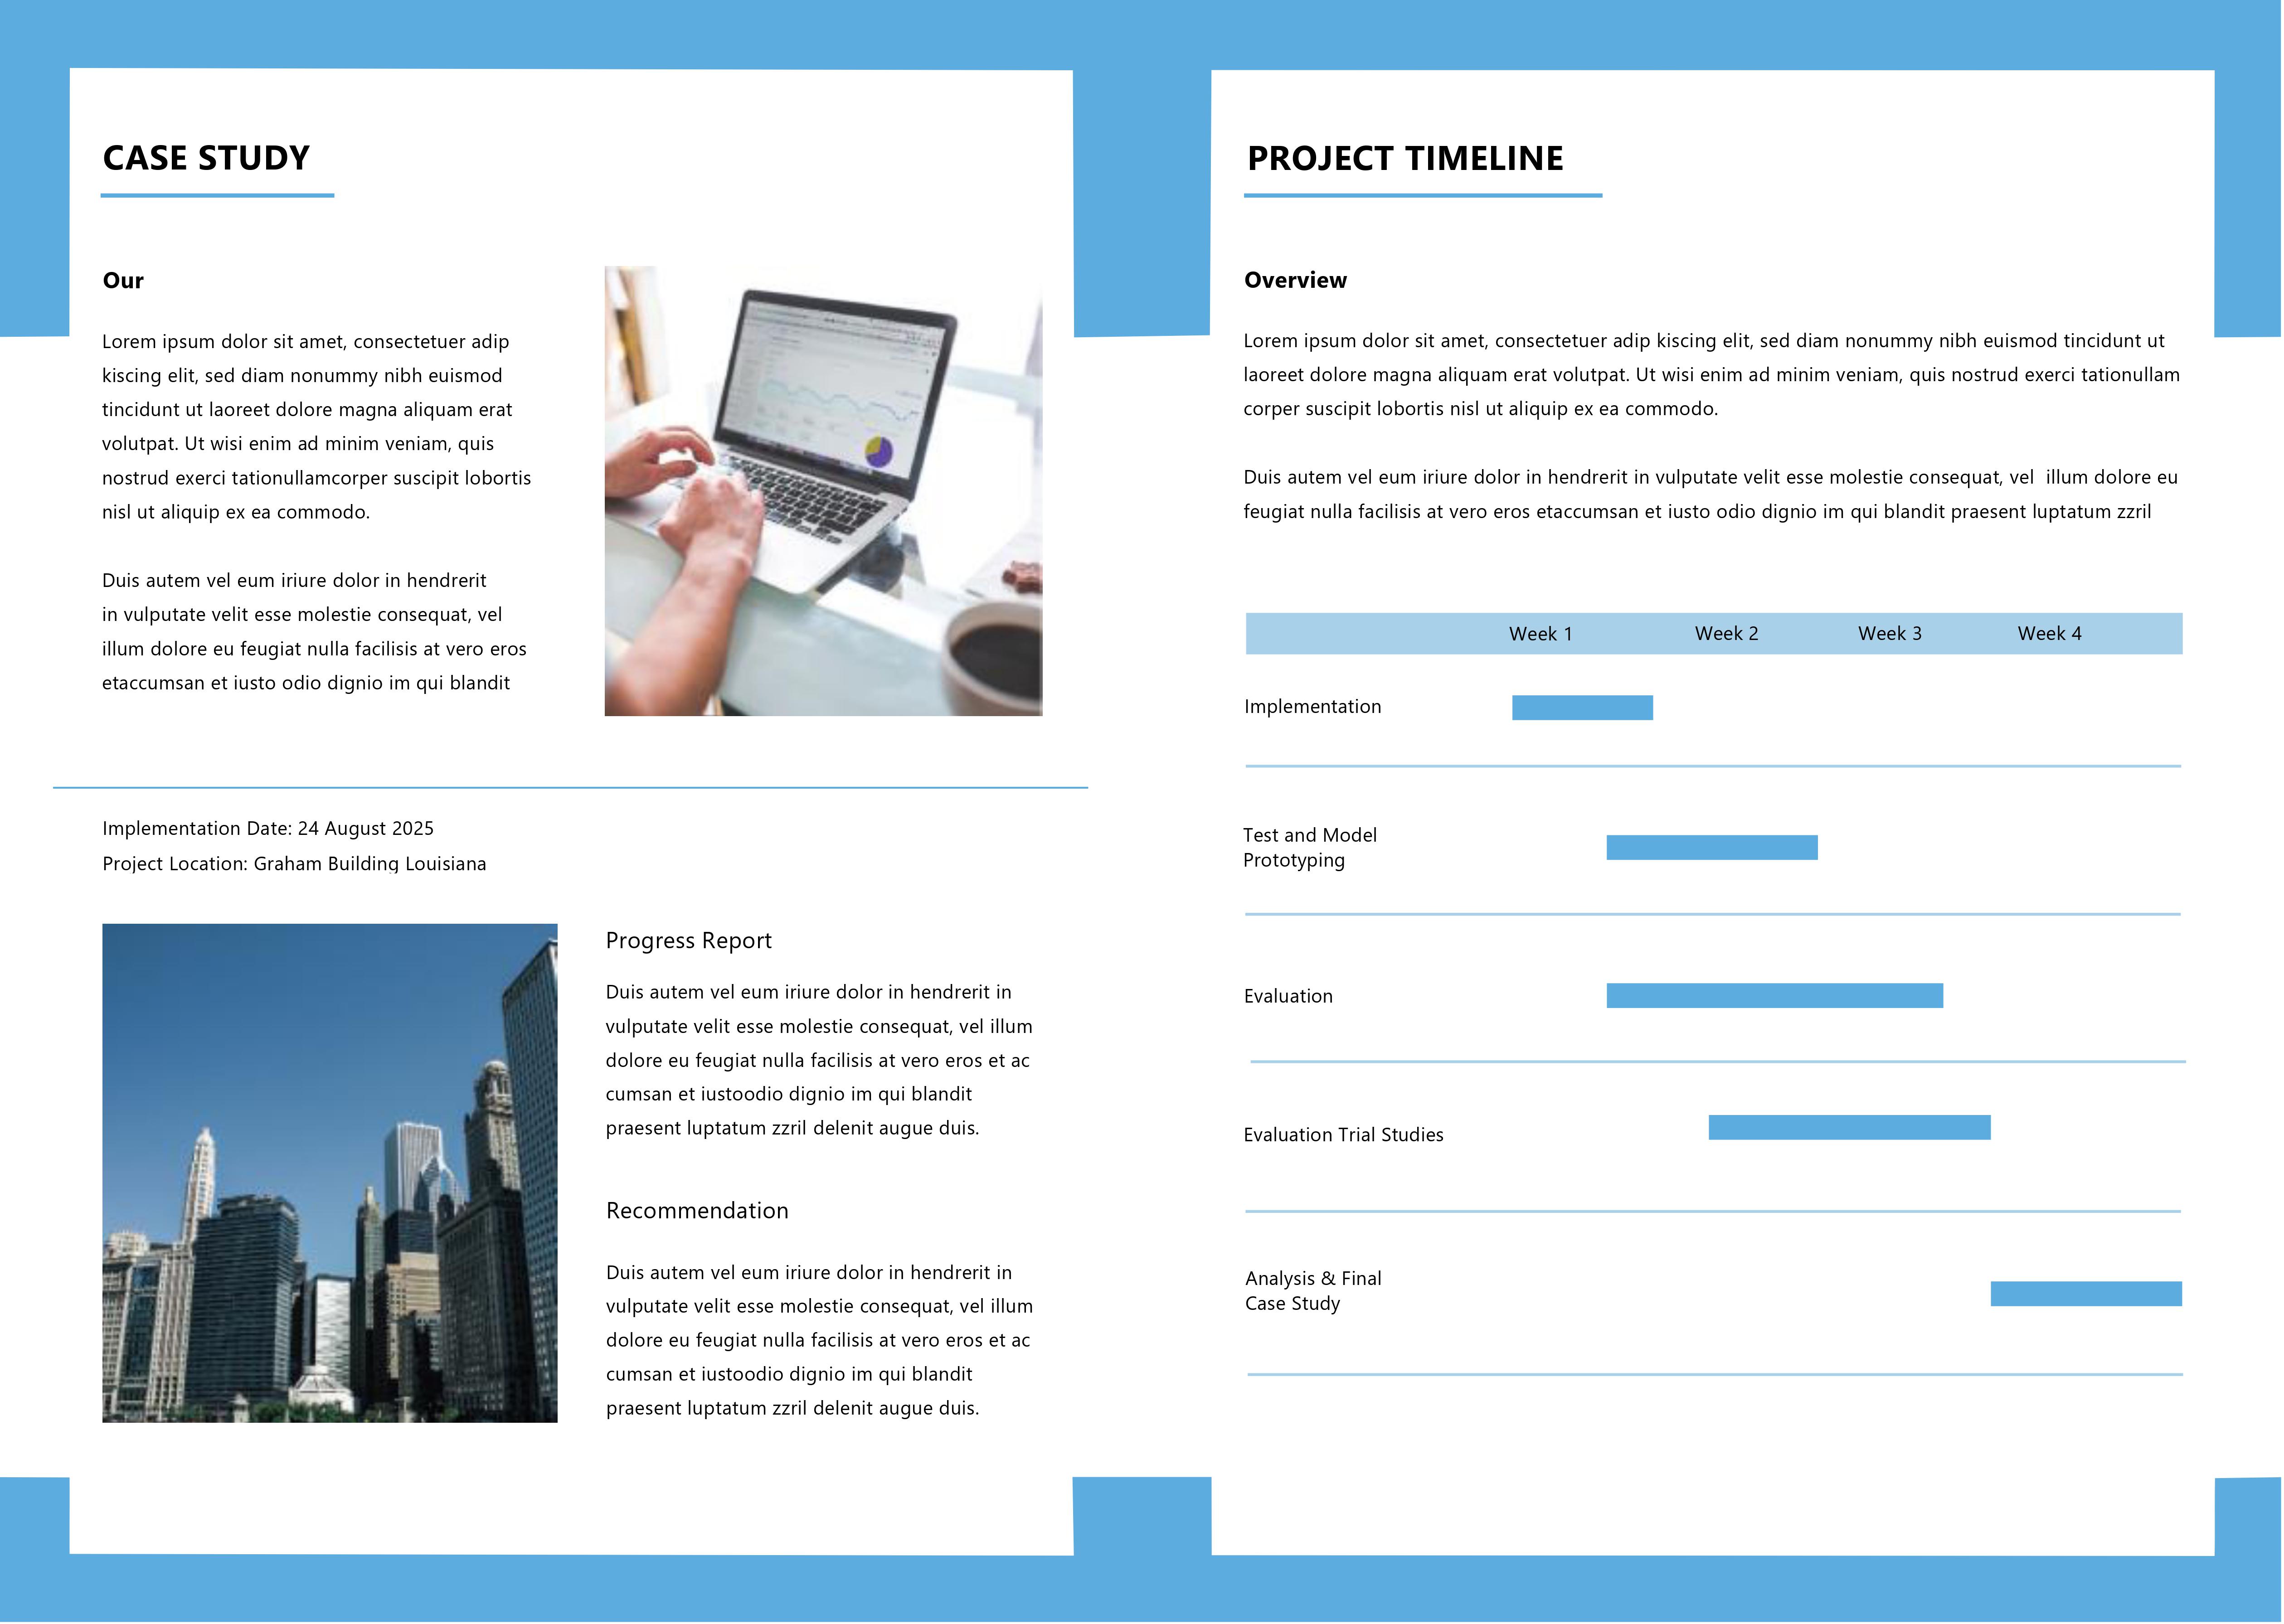 Project Proposal Word Template